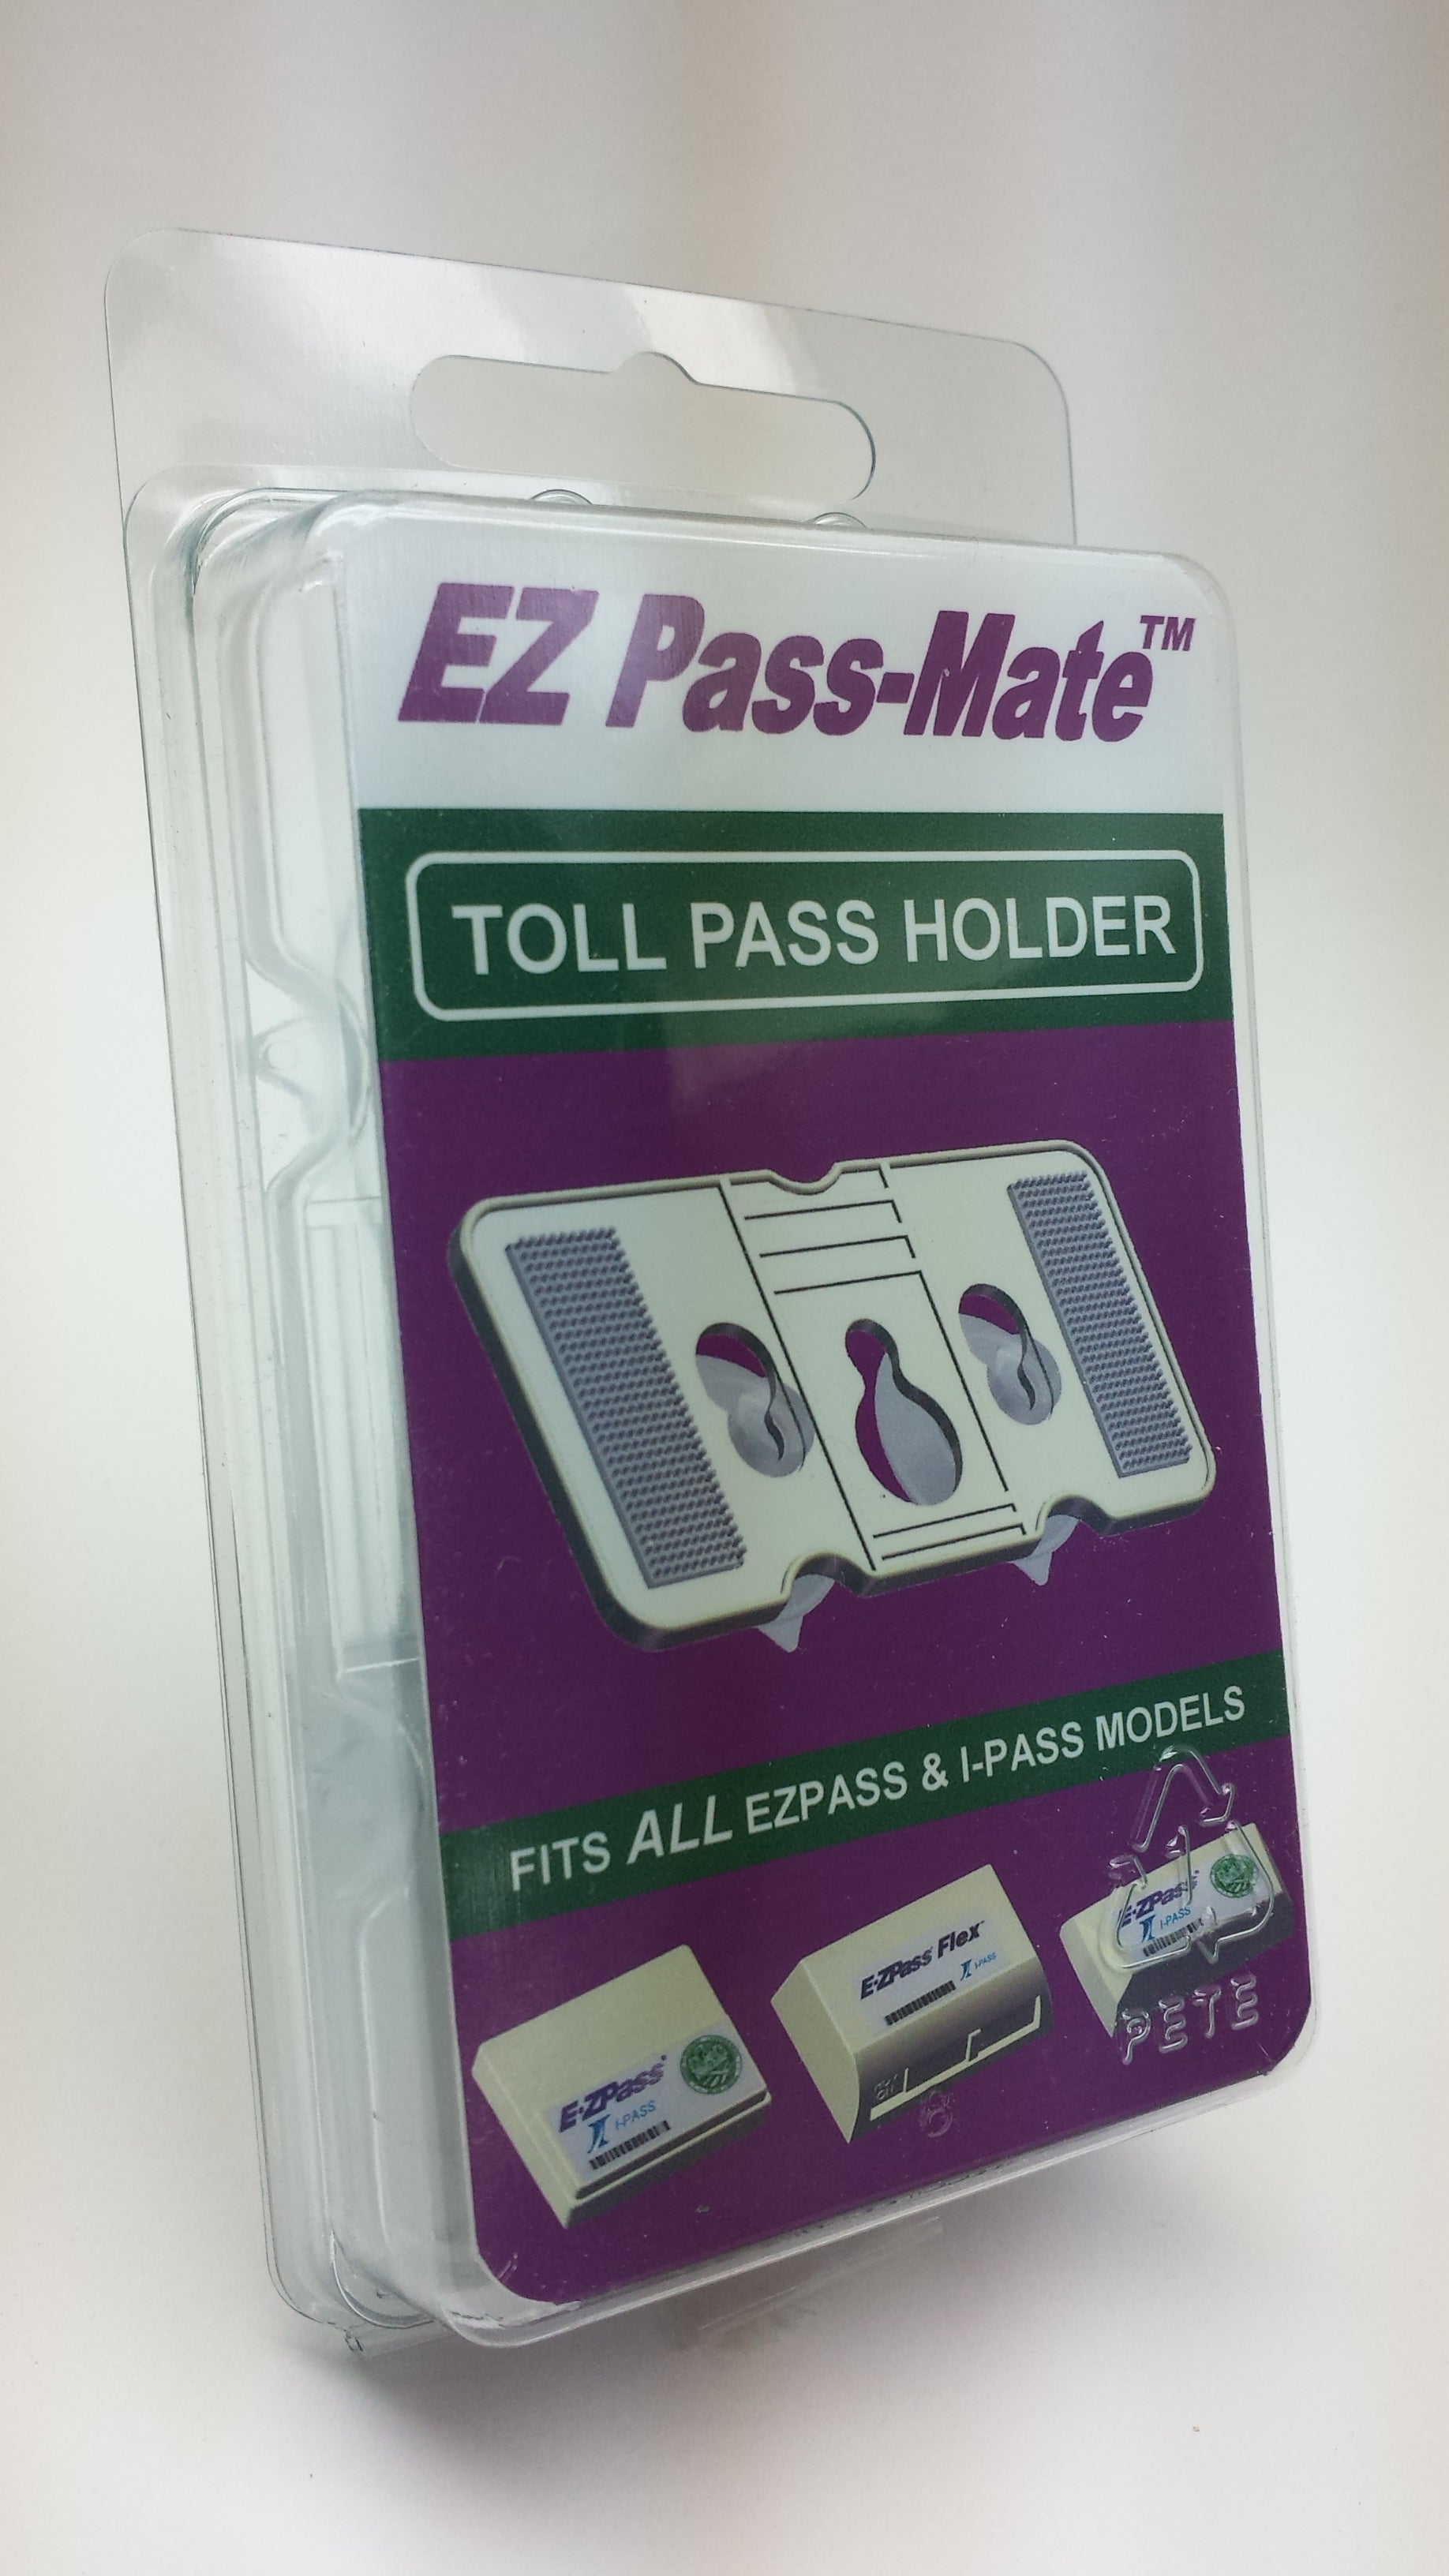 EZ Pass Velcro: bought a new car. Where can I get compatible